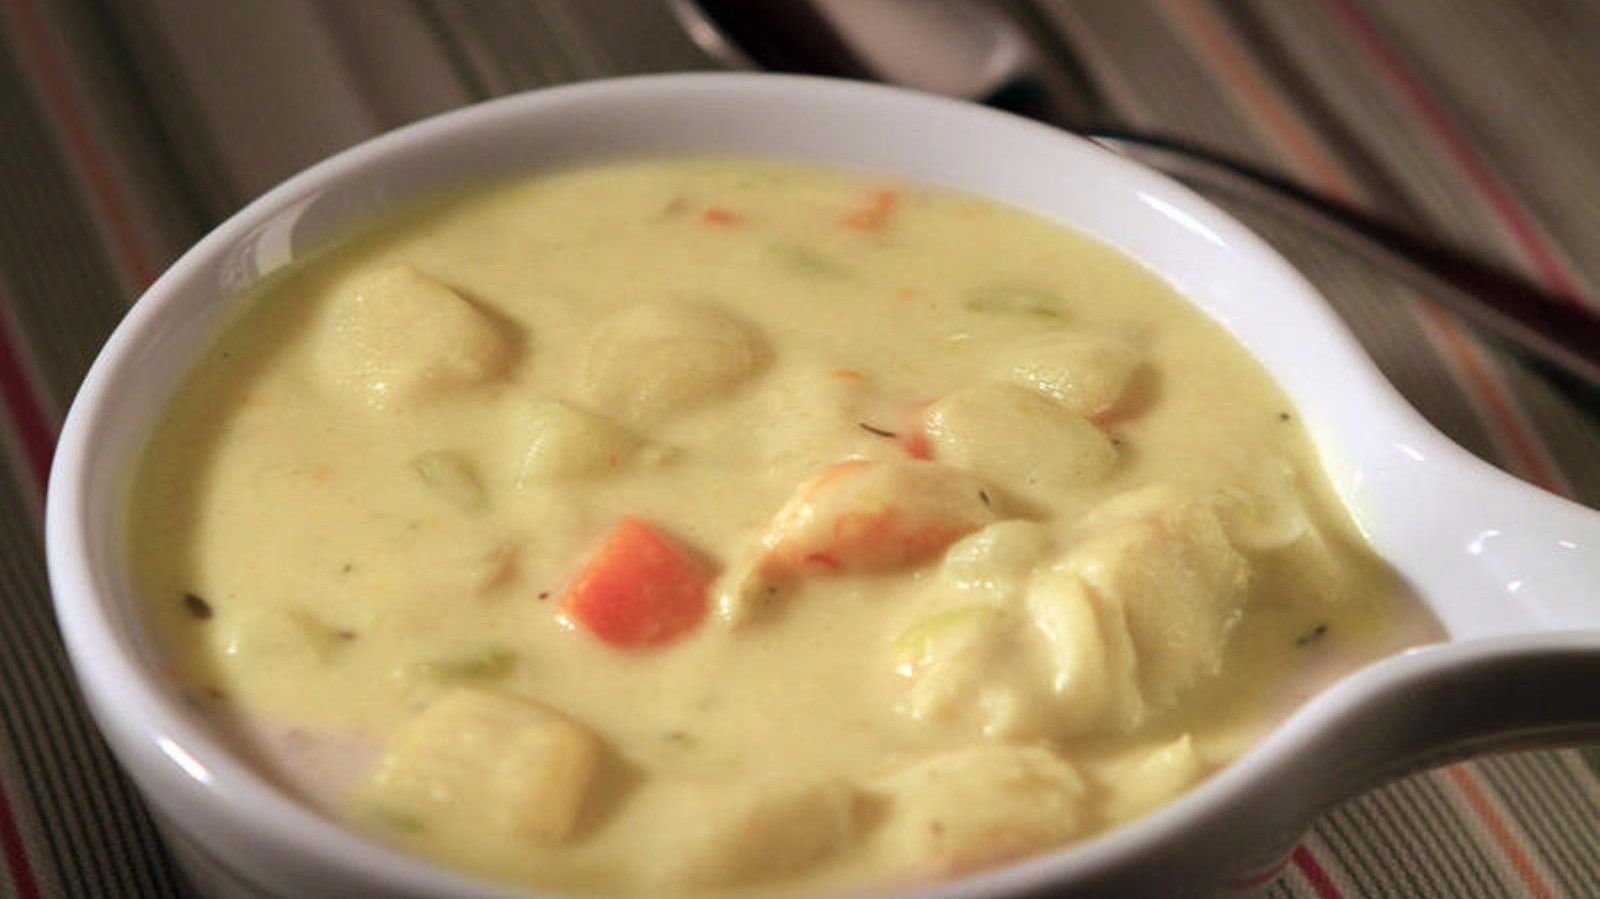 Best Seafood Chowder Recipe
 This might be your new favorite seafood chowder recipe